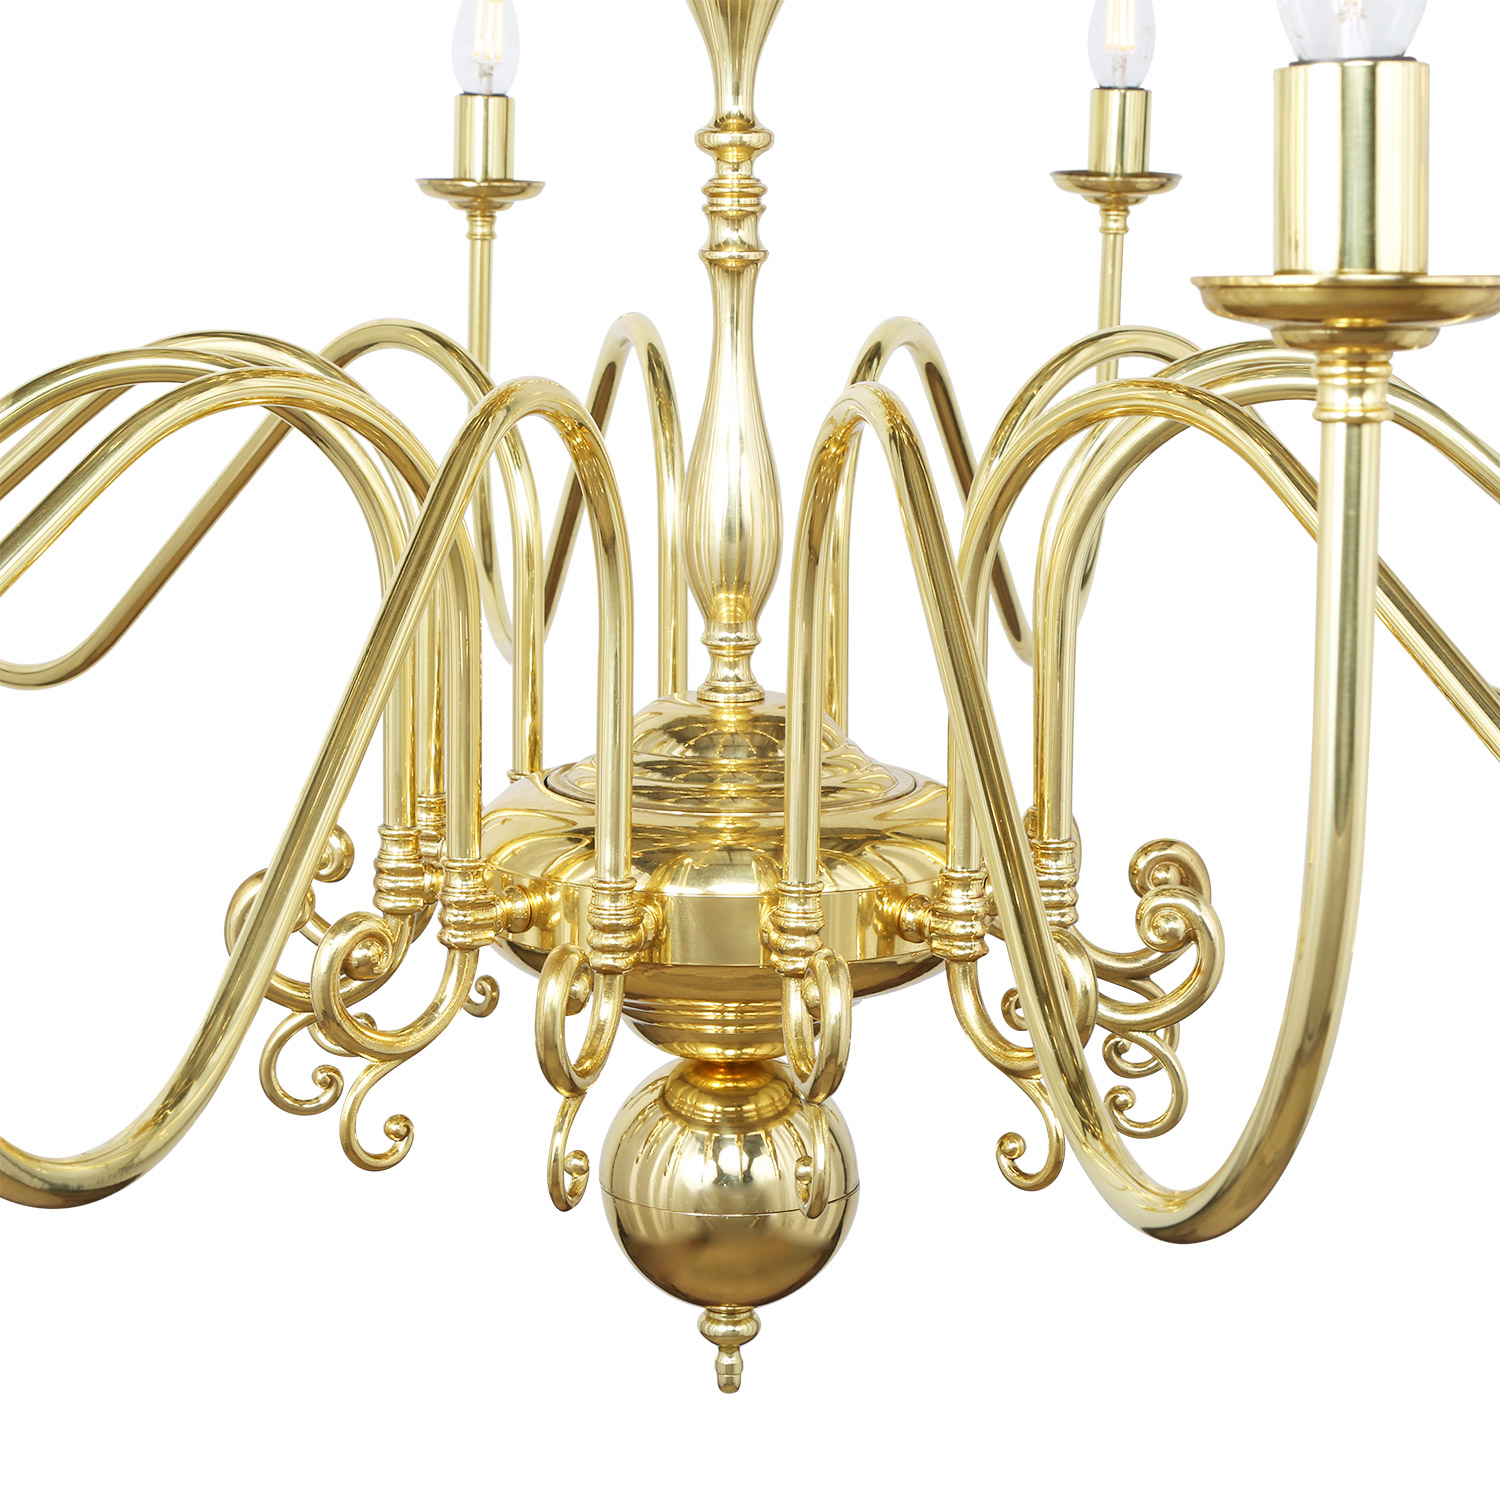 Buy Flemish Traditional Antique Brass Wall Light.